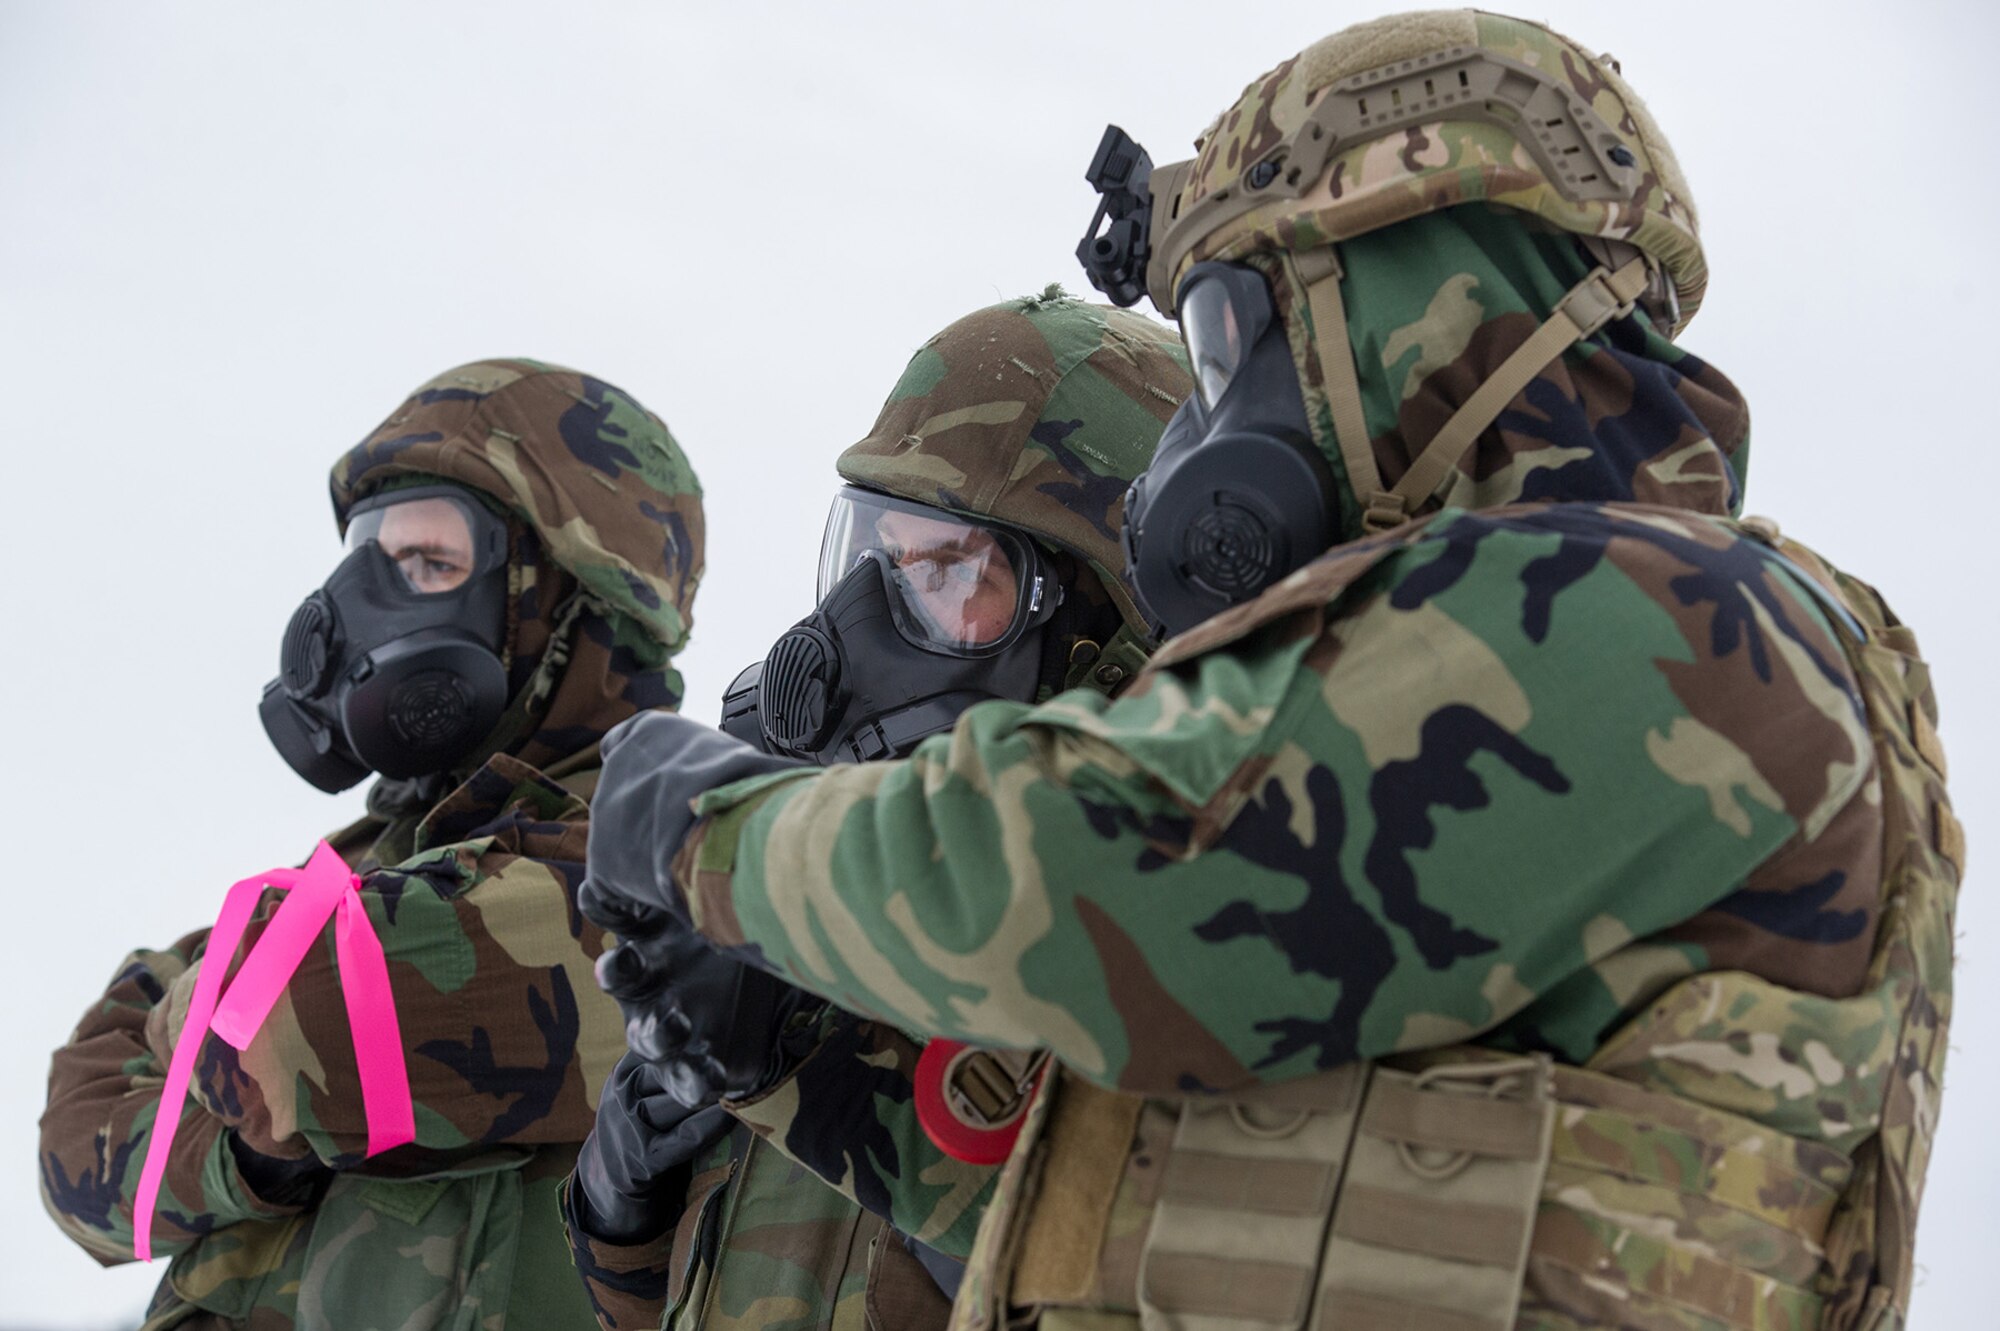 Airmen assigned to the 673d Civil Engineer Squadron, Explosives Ordinance Disposal Flight, observe preparations for a live-fire demolitions exercise in Mission Oriented Protective Posture 4 on Joint Base Elmendorf-Richardson, Alaska, Feb.14, 2018.  The Airmen were conducting EOD training in a simulated chemical weapons contaminated environment.